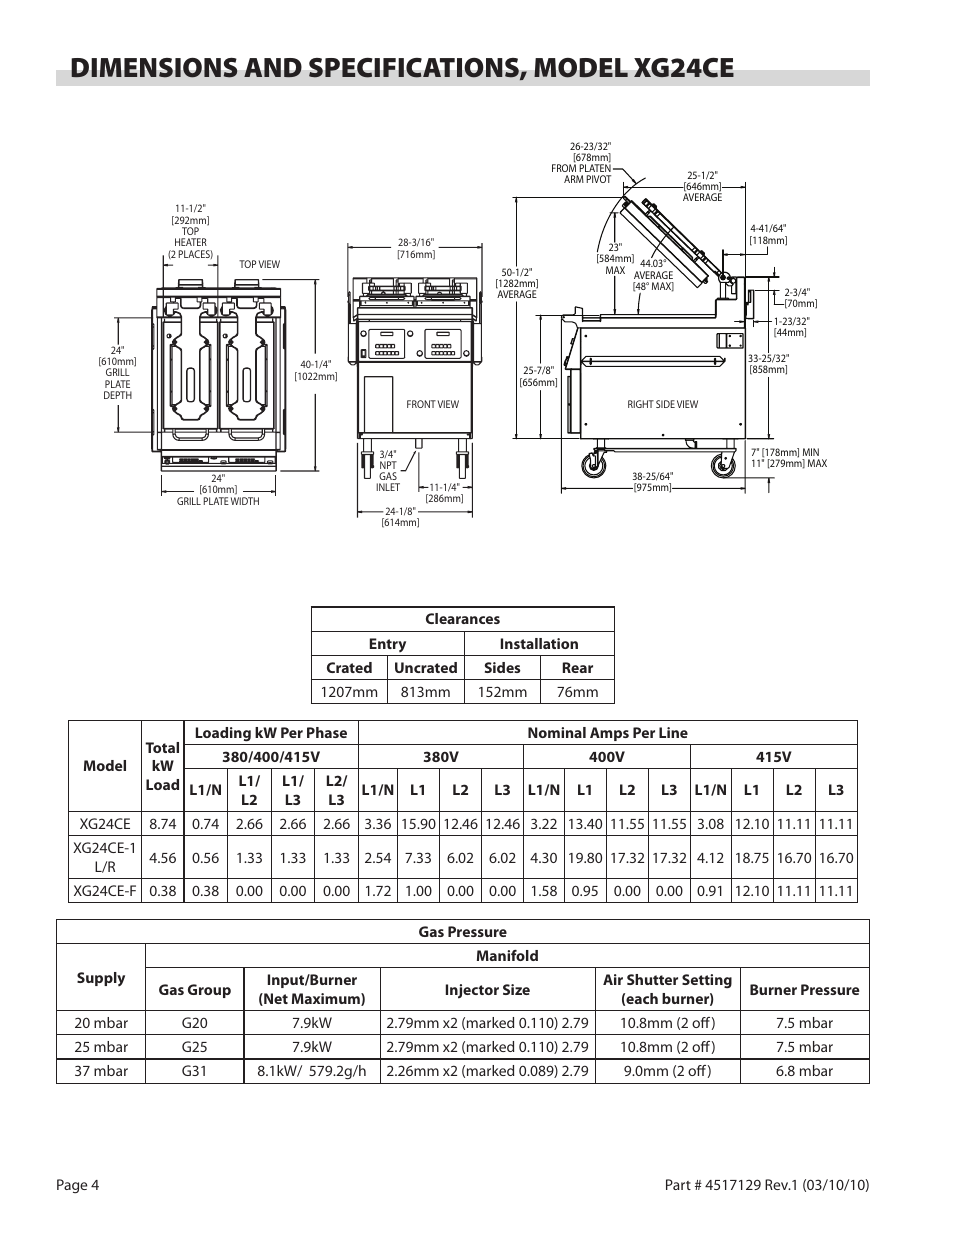 Dimensions and specifications, model xg24ce | Garland XG36CE BE/FR MASTER  SERIES GAS XPRESS GRILL User Manual | Page 4 / 32 | Original mode